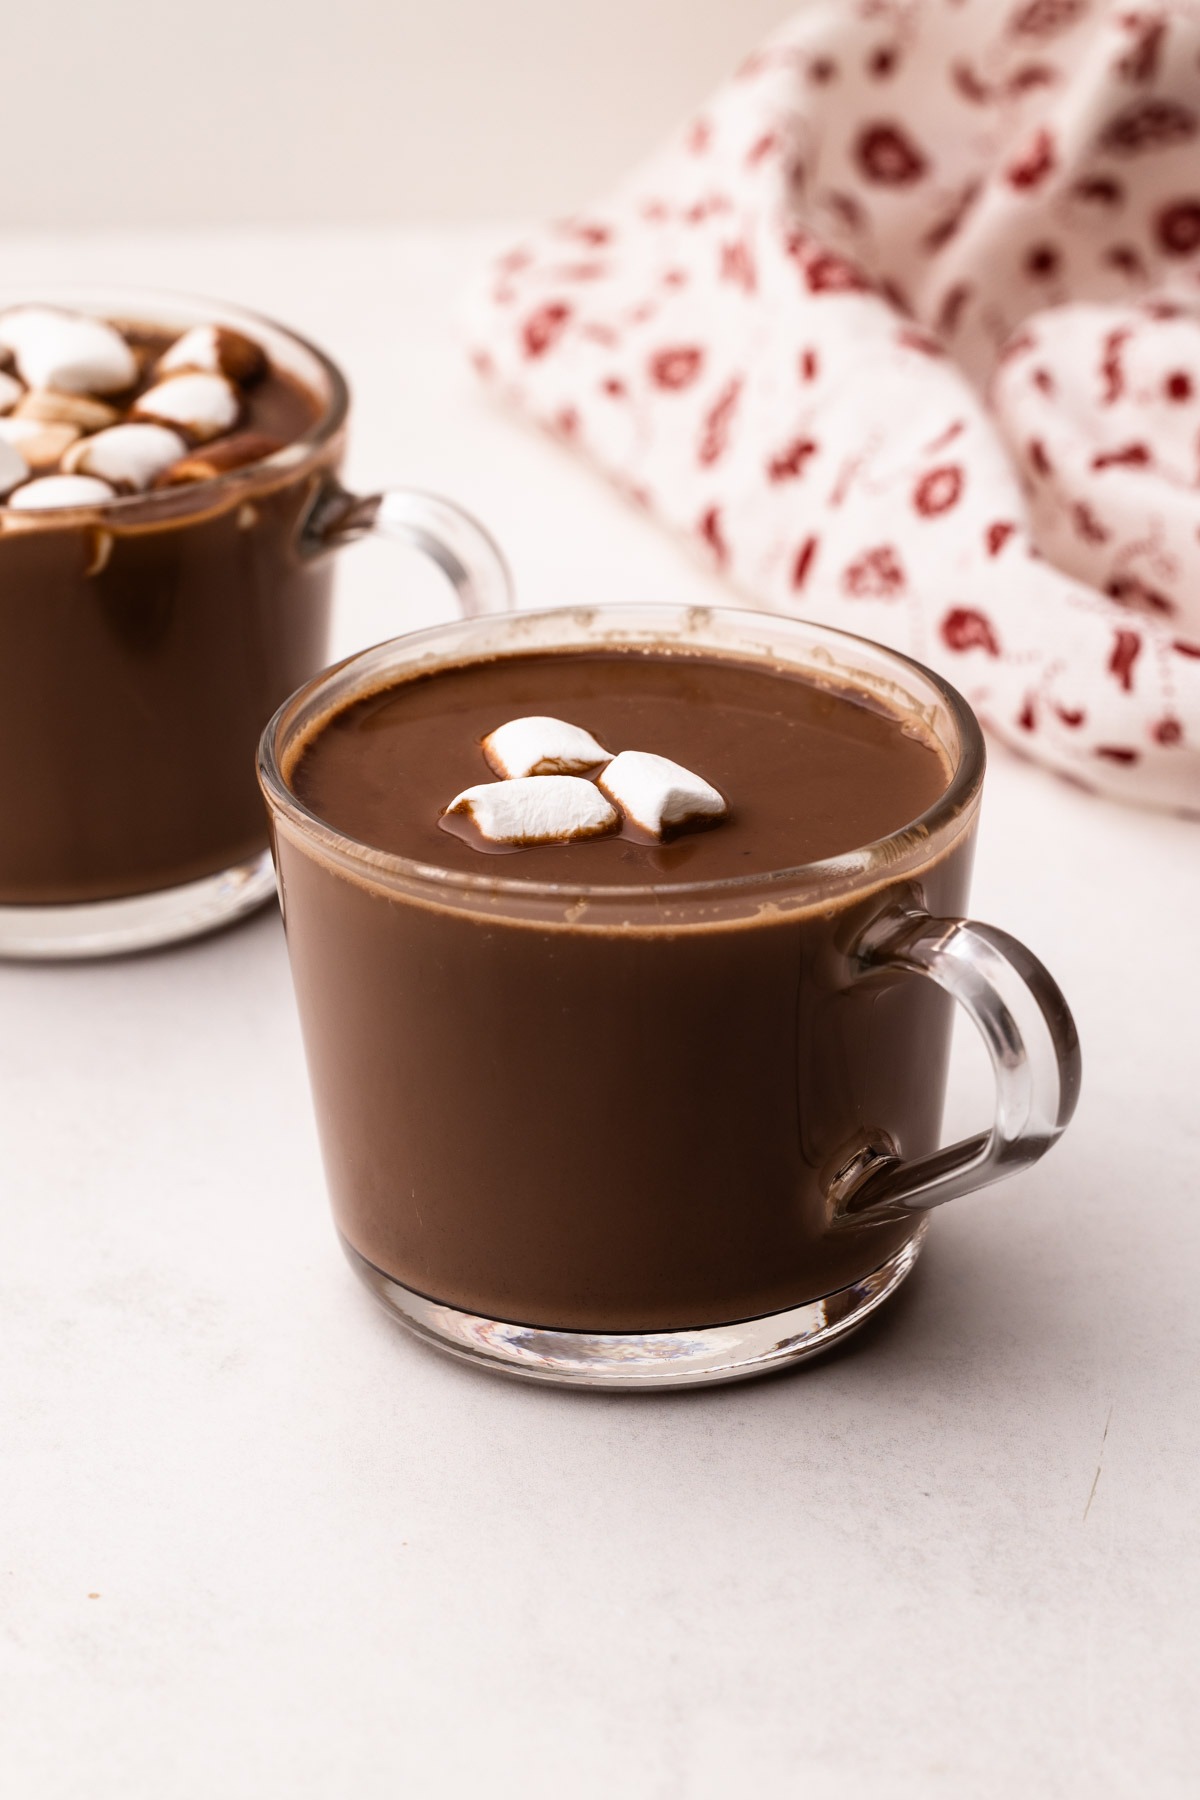 A mug of hot chocolate with chocolate chips with marshmallows on top.